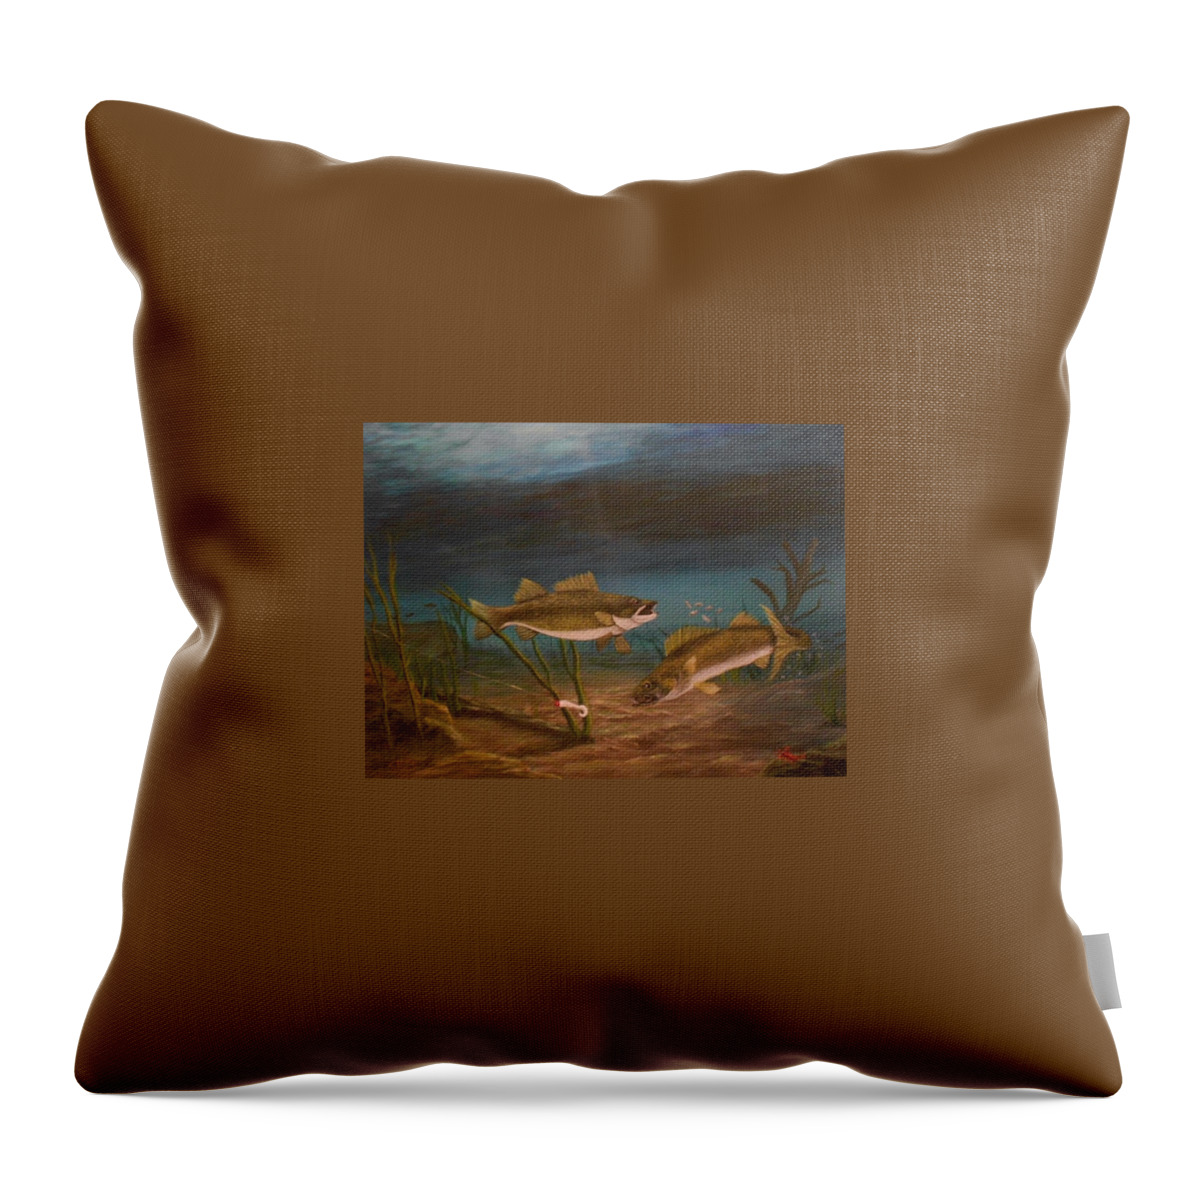 Underwater Throw Pillow featuring the painting Supper Time by Sheri Keith